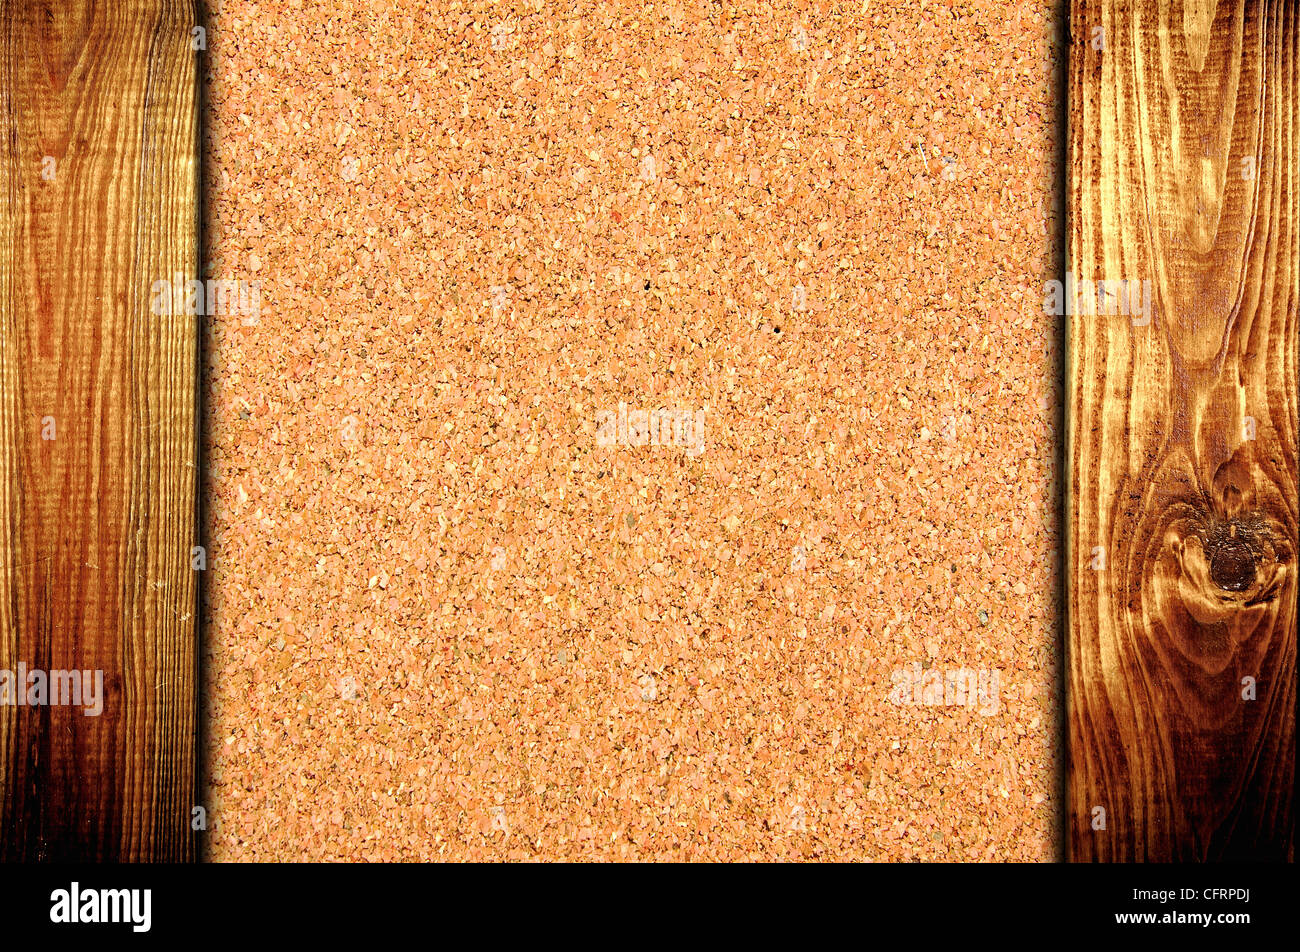 The cork board at wooden panel wall background Stock Photo